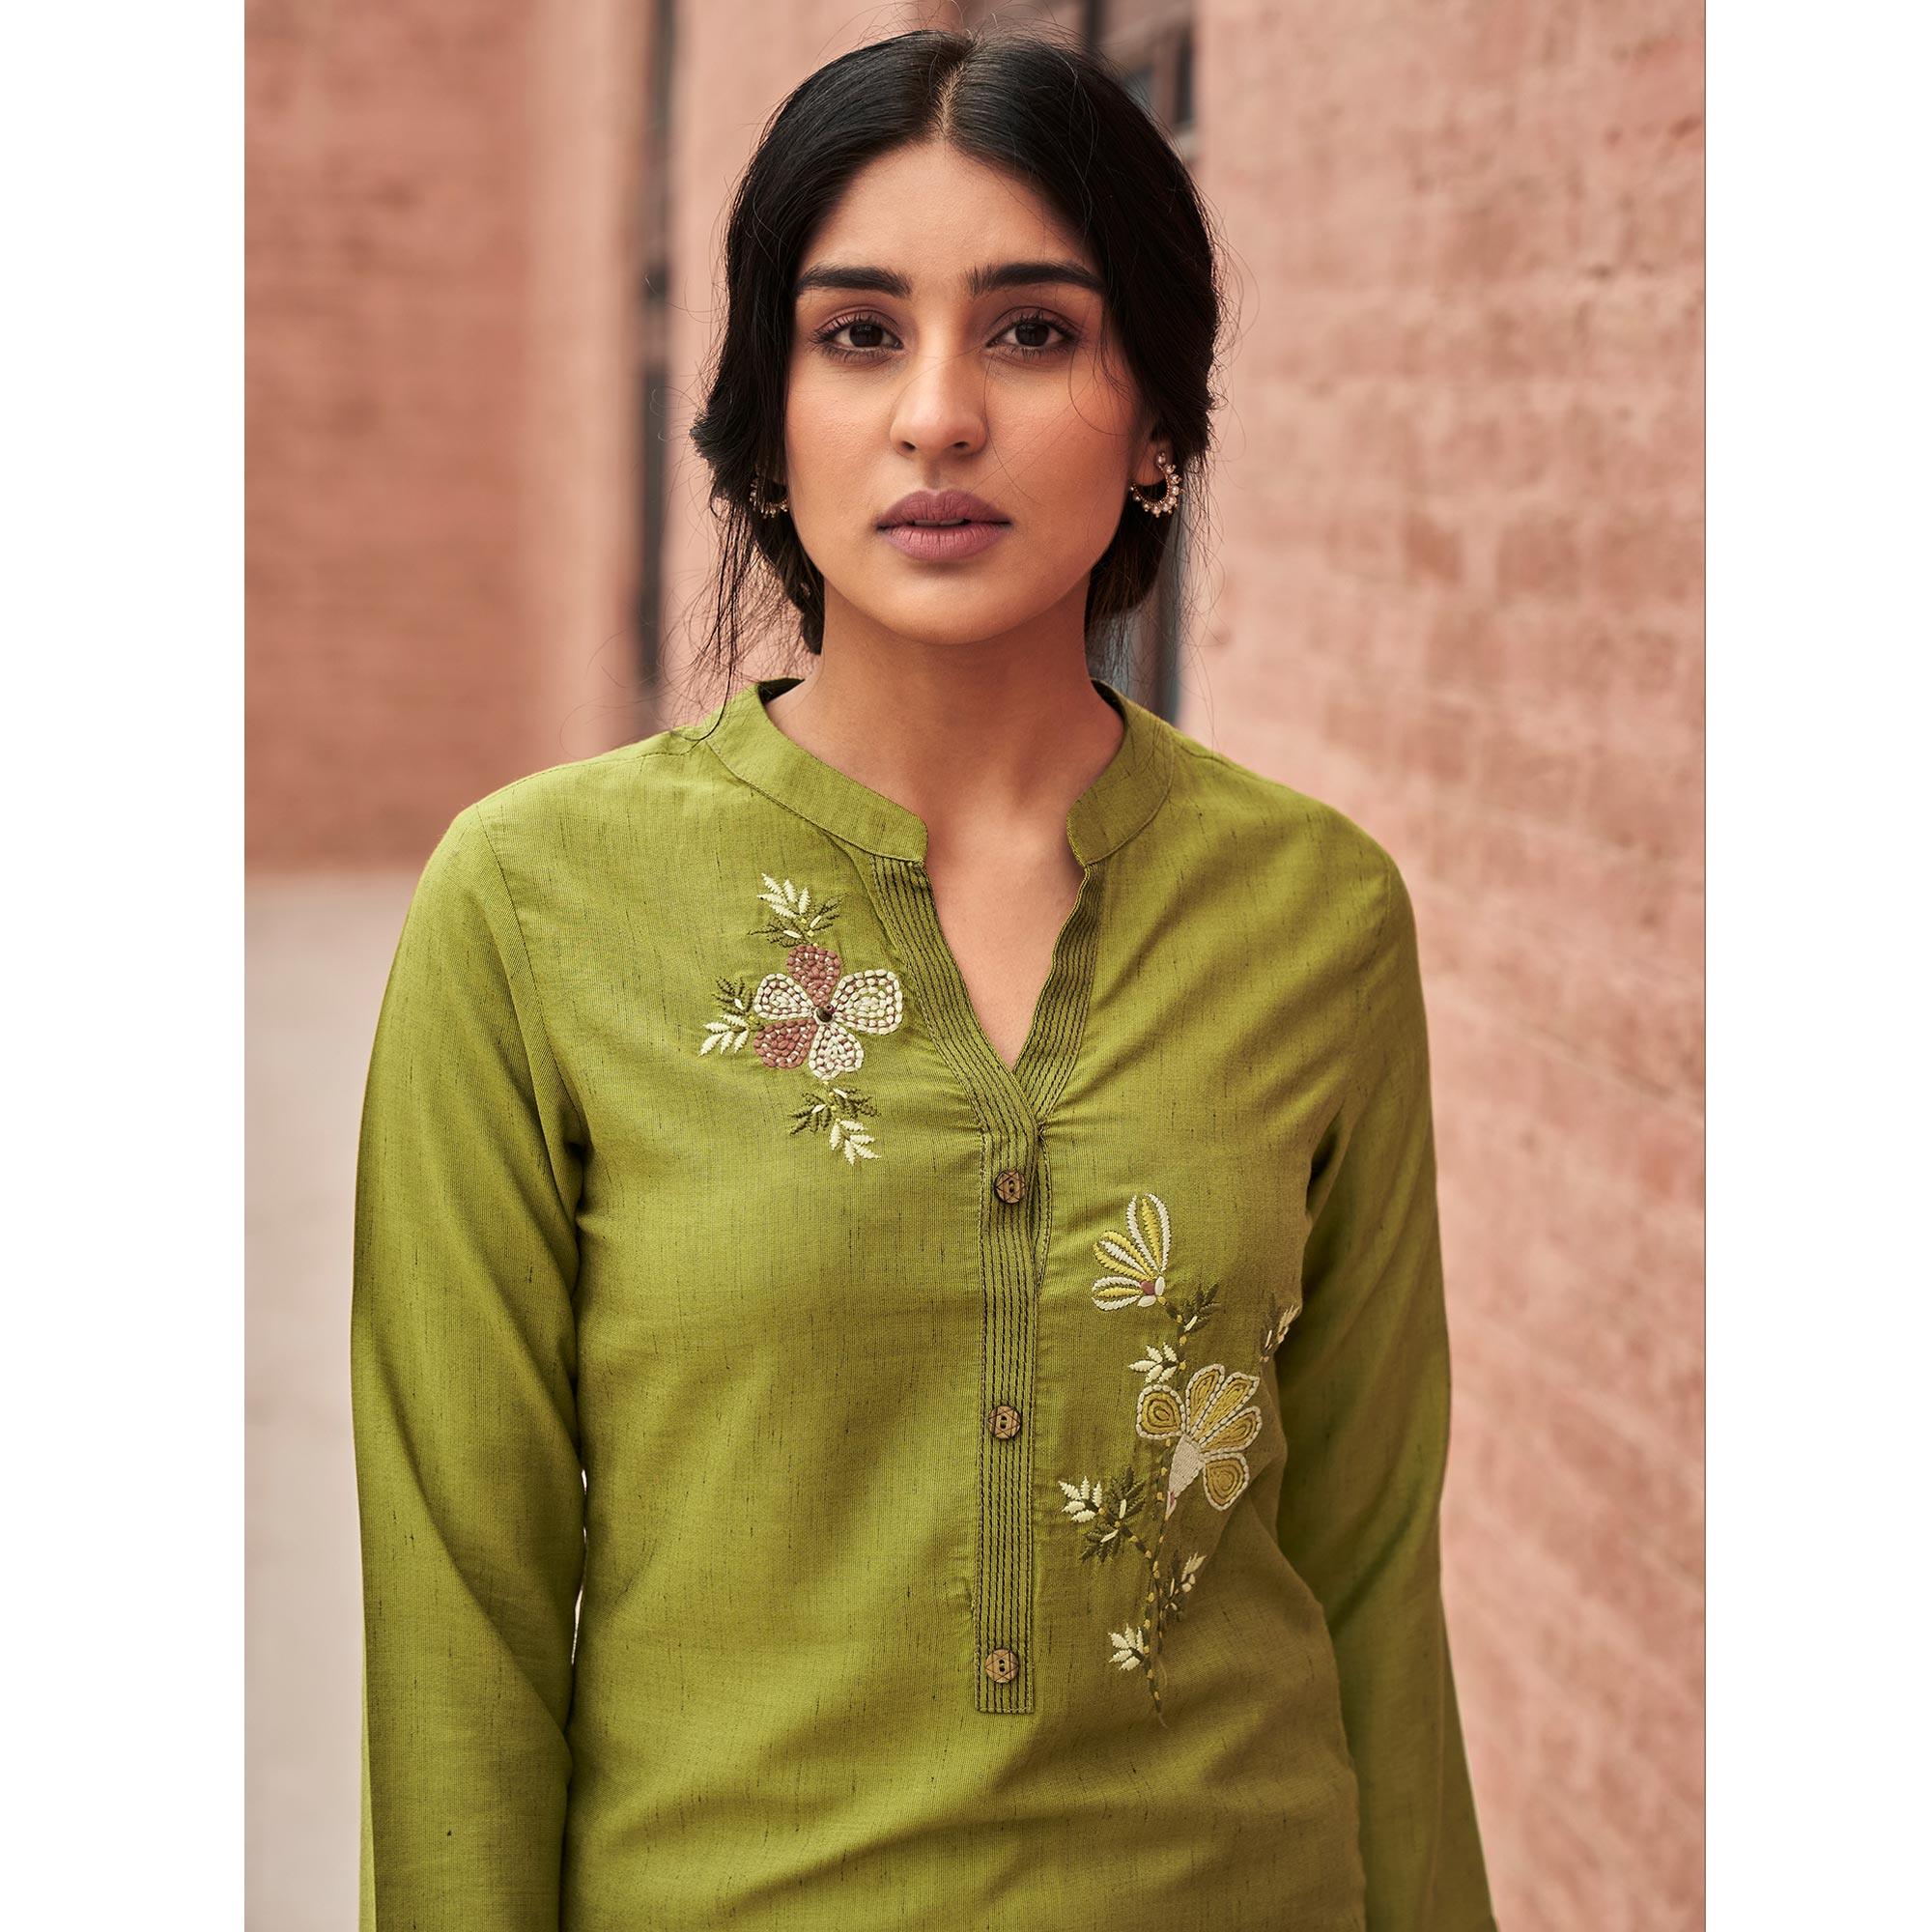 Engrossing Green Colored Partywear Embroidered Pure Viscose Kurti - Peachmode